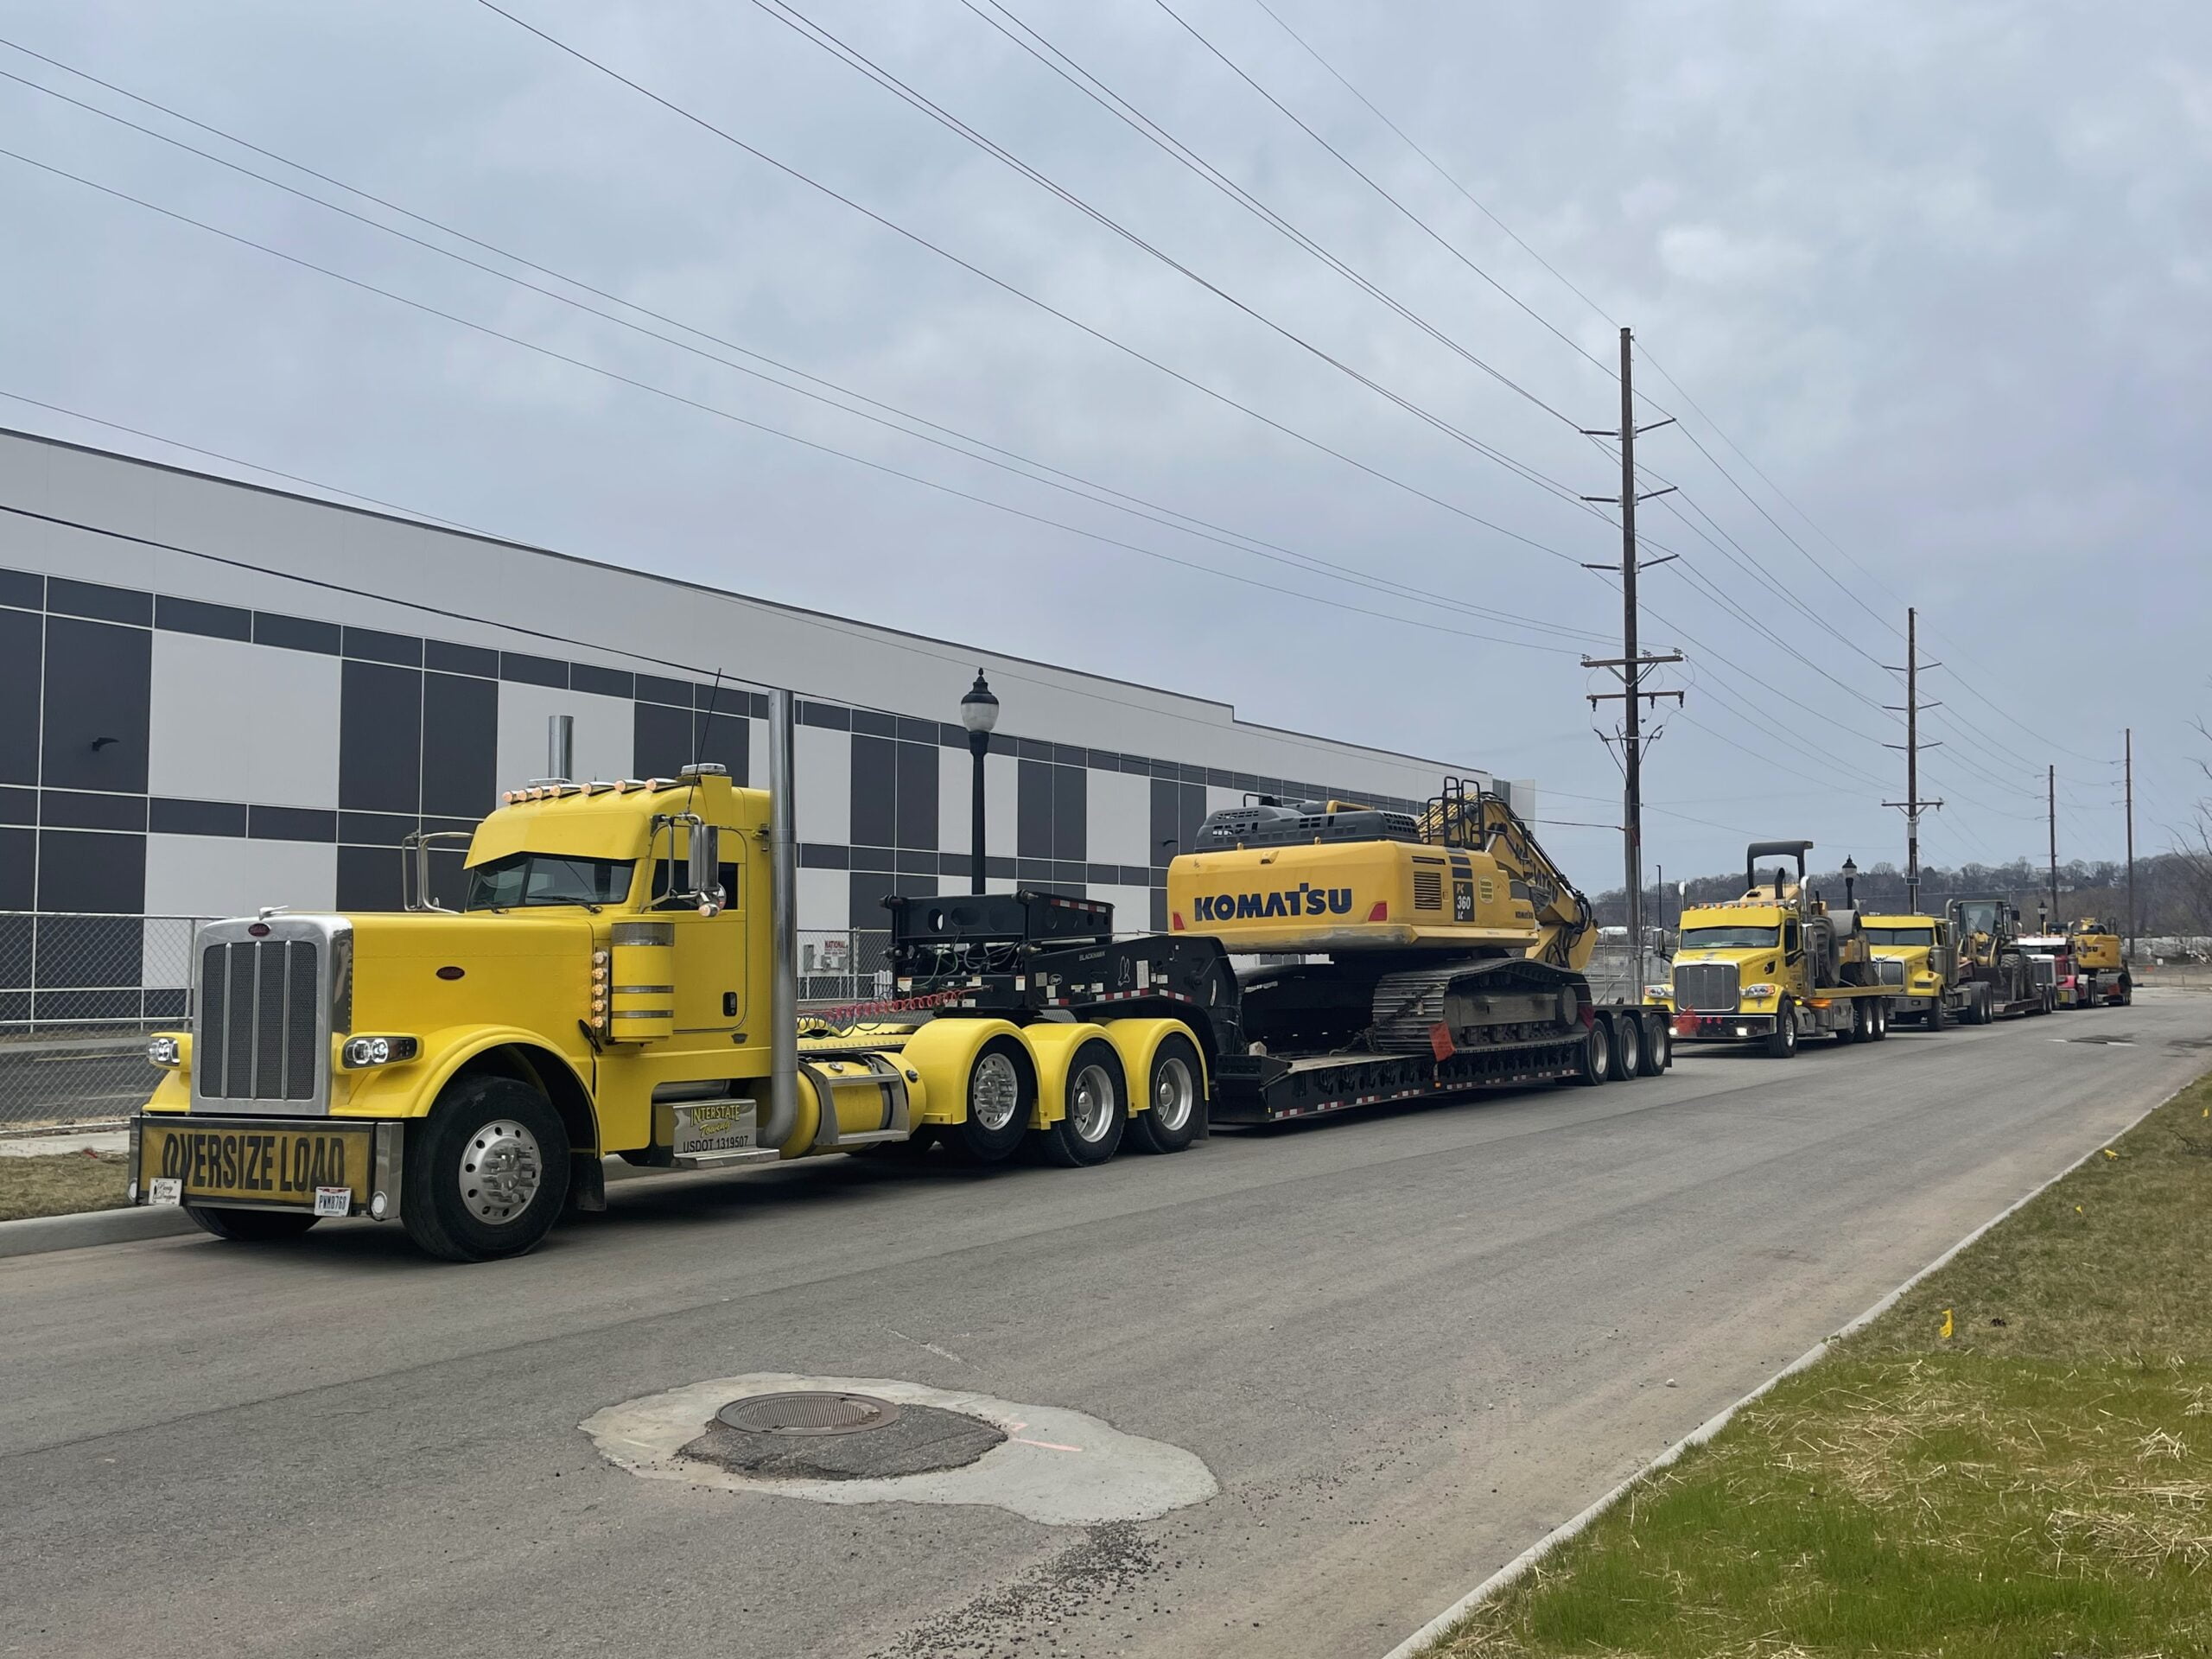 Heavy Equipment Towing A C Mobile Home Park